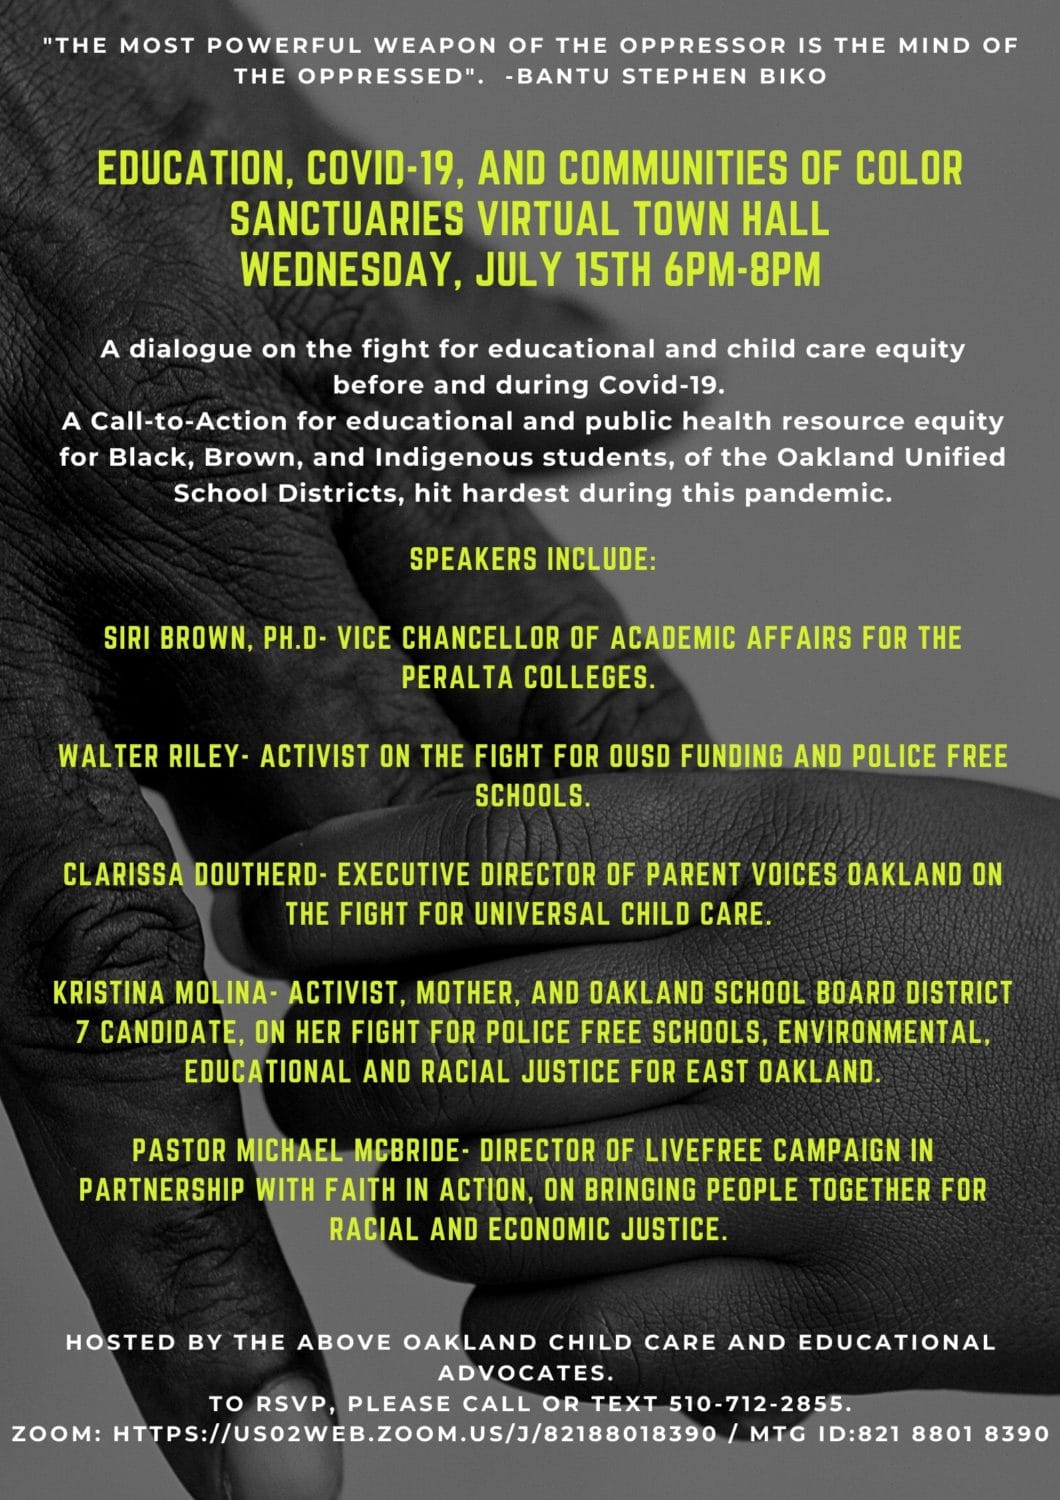 Education-COVID-19-and-Communities-of-Color-Sanctuaries-Virtual-Town-Hall-flier-1, ‘Education, COVID 19 and Communities of Color Sanctuaries Virtual Town Hall’ Wednesday, July 15, 6-8 p.m., Local News & Views 